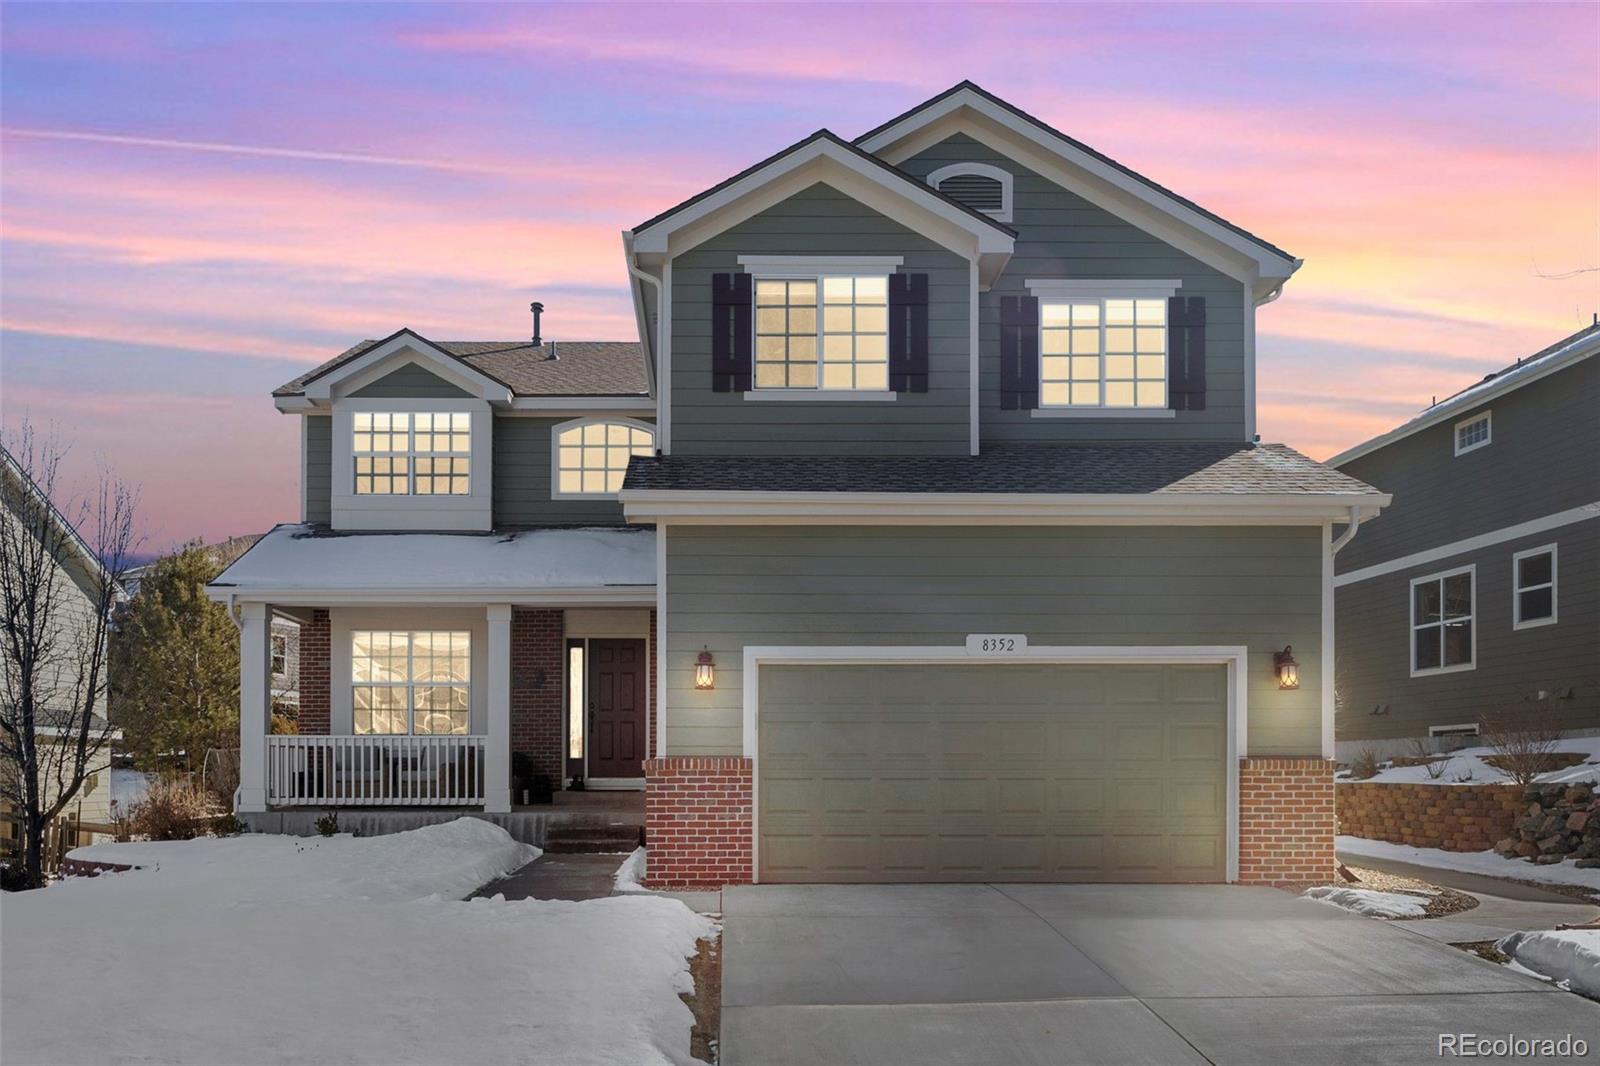 8352  Briar Trace Way, castle pines MLS: 7252414 Beds: 4 Baths: 4 Price: $800,000